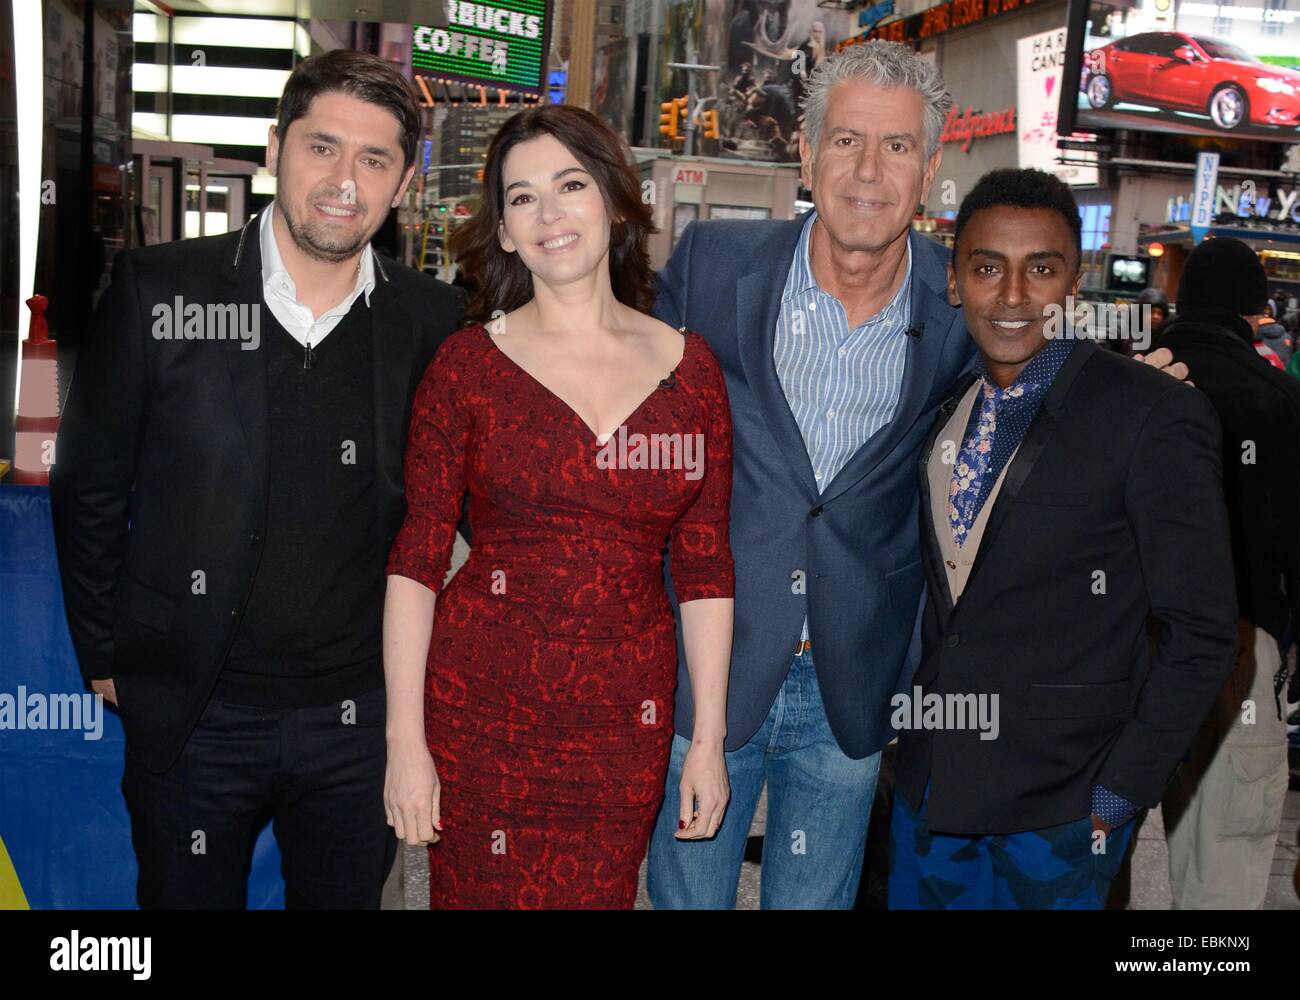 New York, USA. 02nd Dec, 2014. “The Taste” cast: Nigella Lawson, Anthony Bourdain, Marcus Samuelsson, and Ludo Lefebvre out and about for Celebrity Candids - TUE, , New York, NY December 2, 2014. Photo By: Derek Storm/Everett Collection Credit:  Everett Collection Inc/Alamy Live News Stock Photo